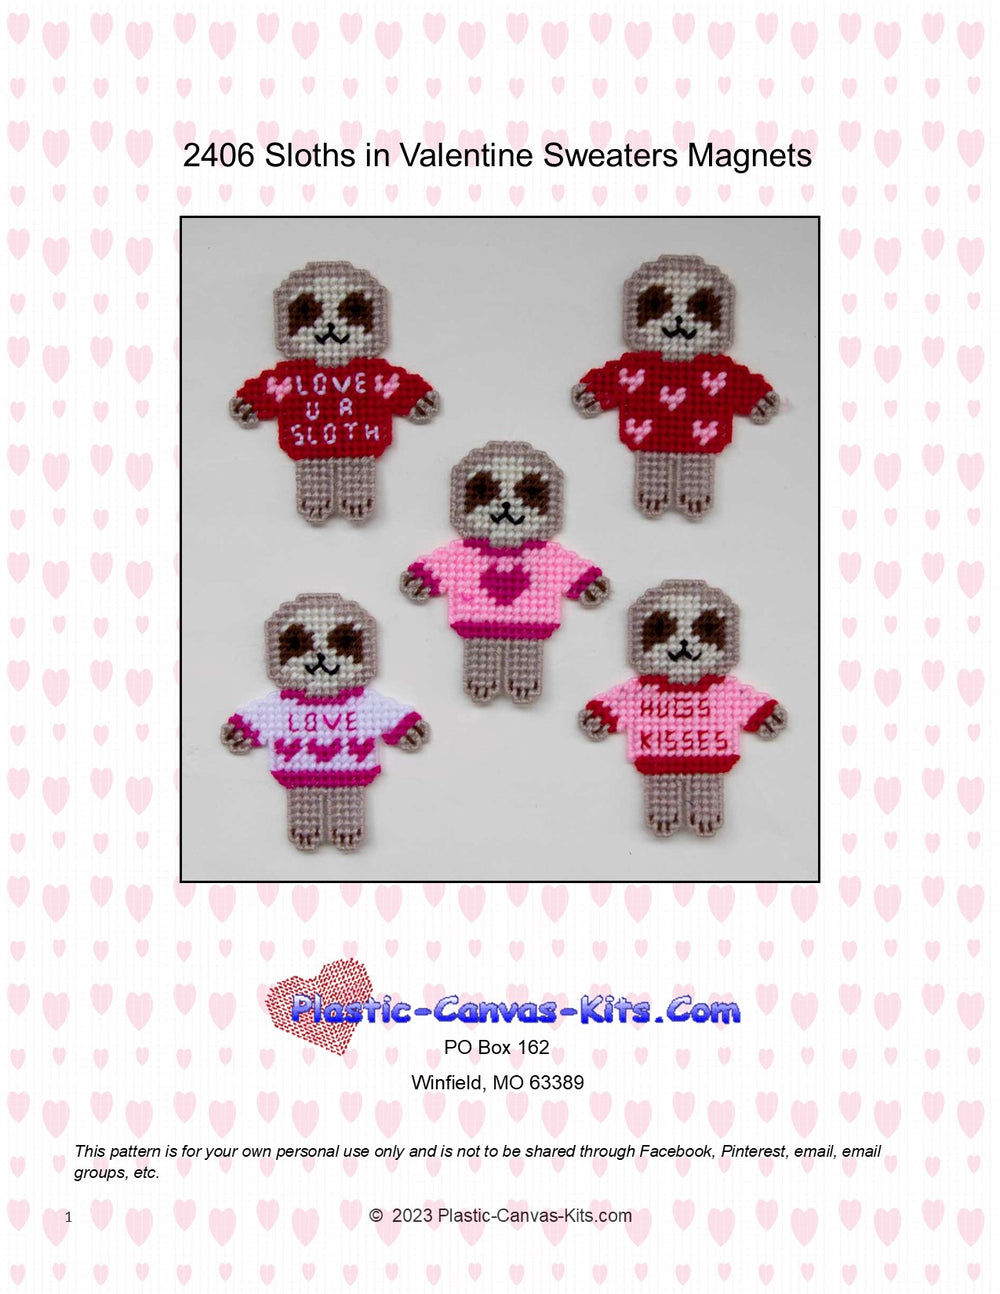 Sloths in Valentine's Day Sweaters Magnets